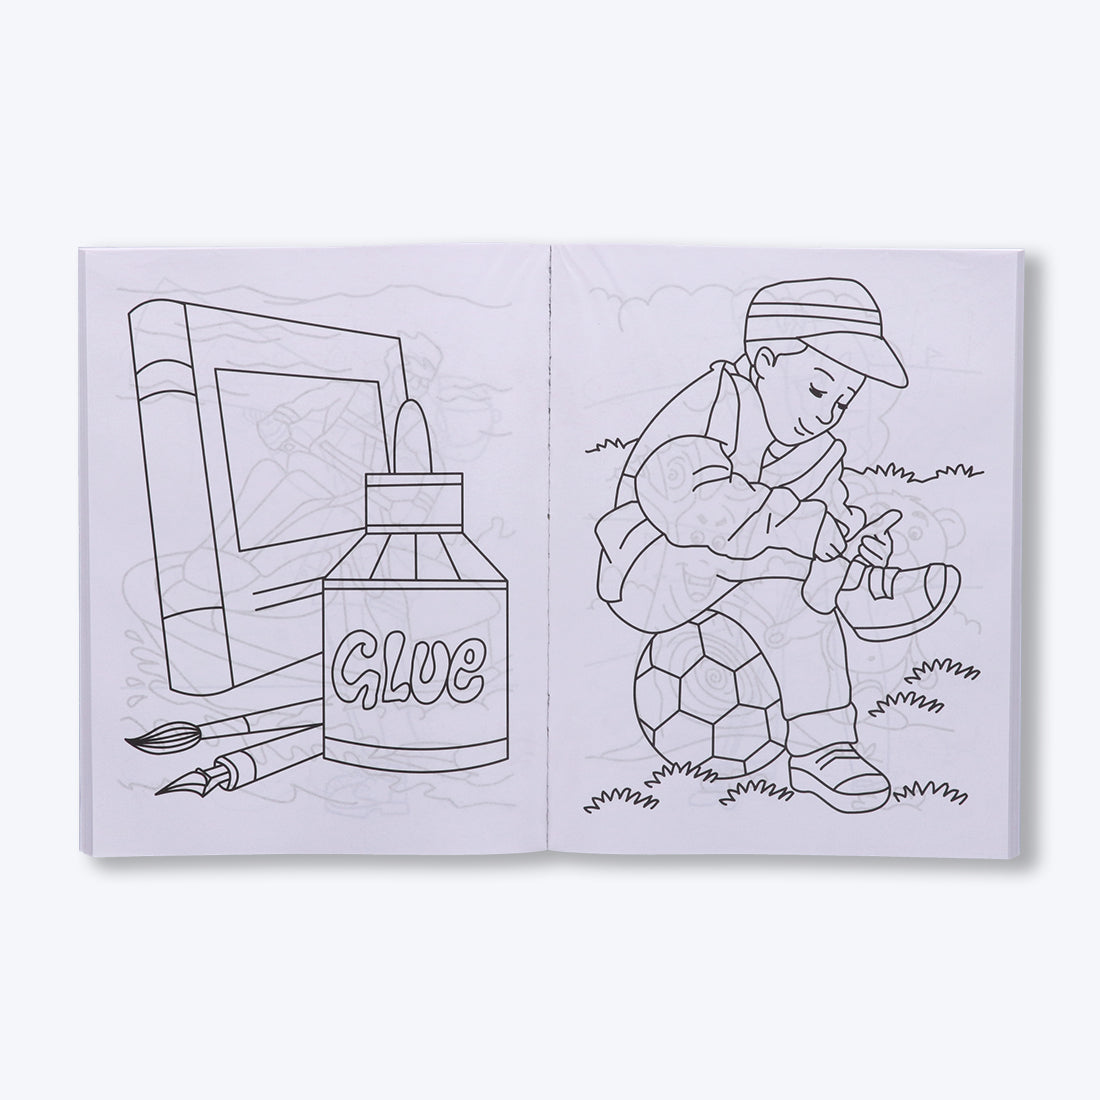 Navneet's Jumbo Colouring Book - II can be used with colour pencils or crayons for age group.